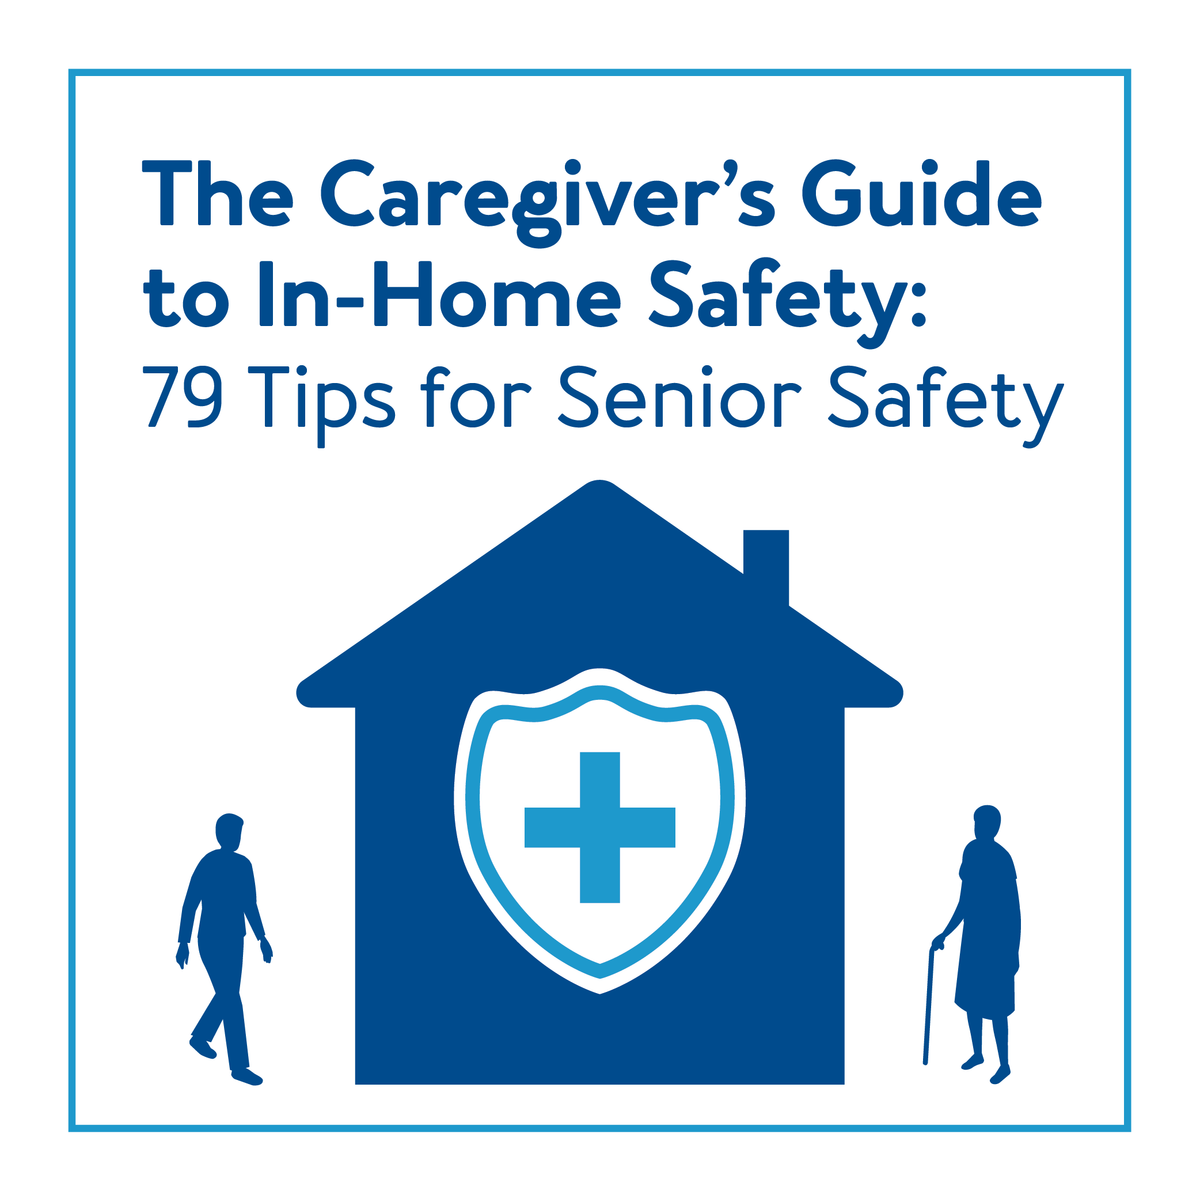 Home graphic with two outlines of people, text the Caregiver’s Guide to In-Home Safety: 79 Tips for Senior Safety.